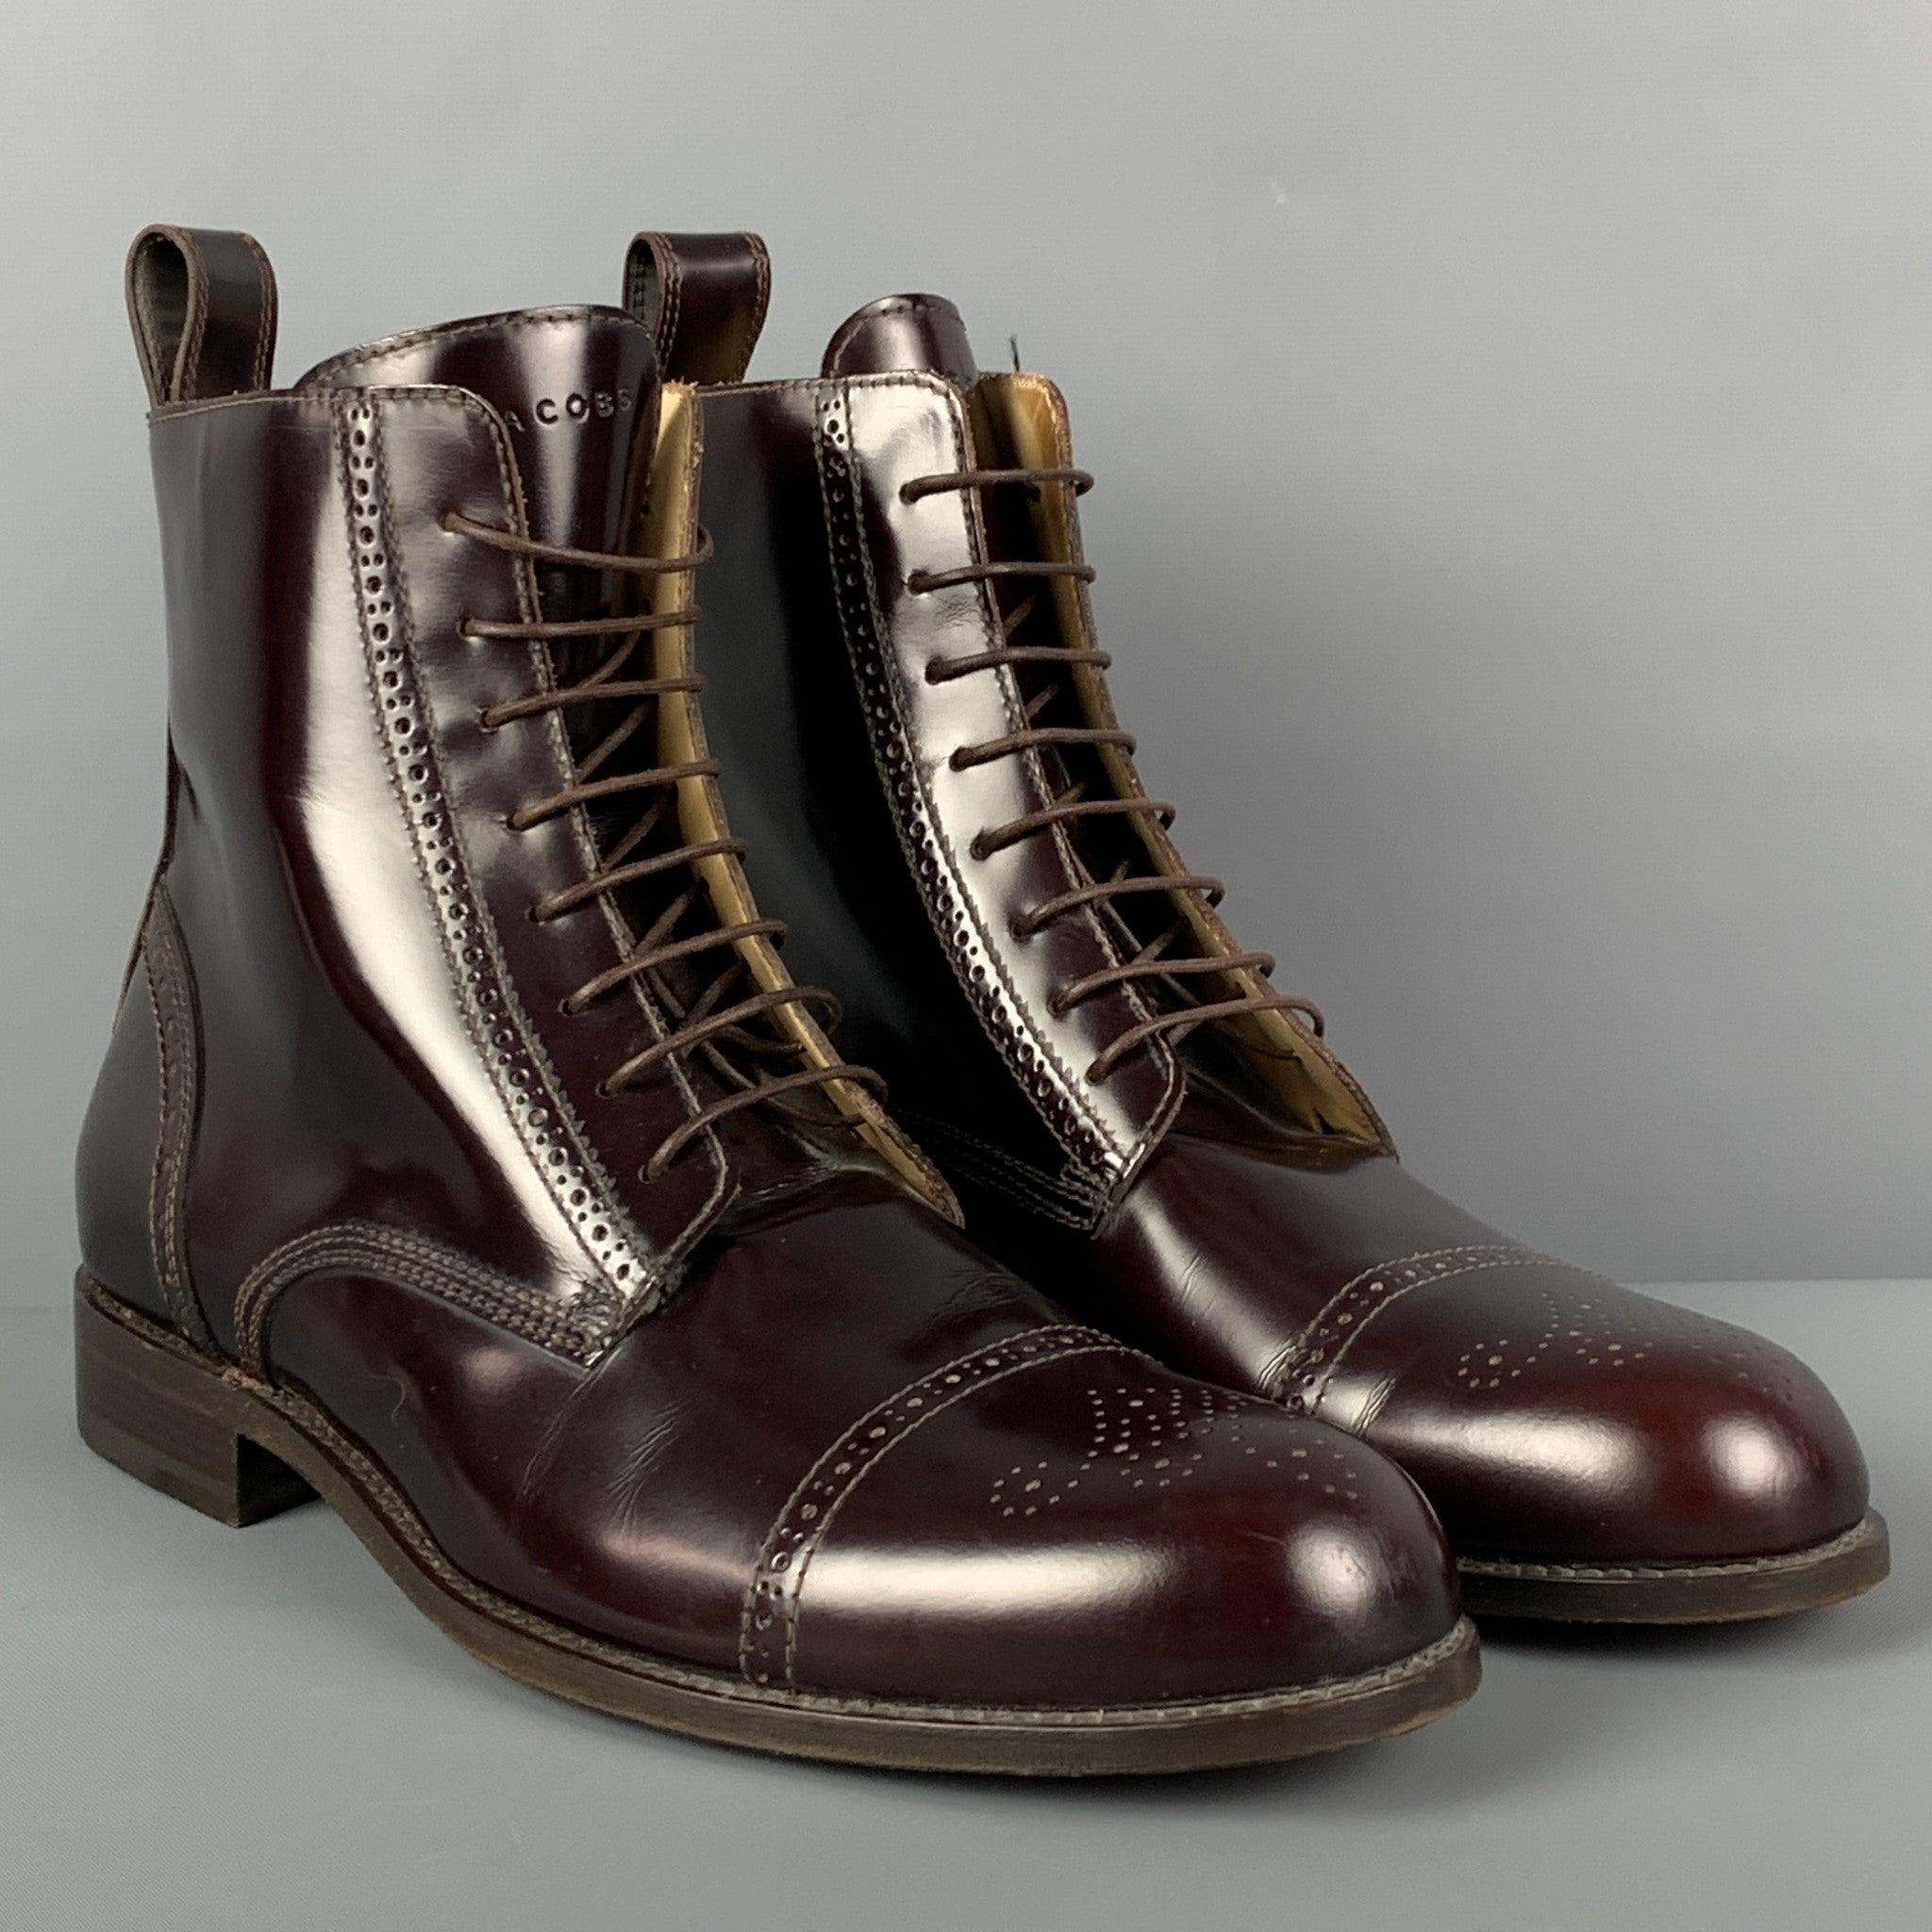 MARC JACOBS ankle boots comes in a burgundy perforated leather featuring a cap toe ad a lace up closure. Handmade in Italy.
Very Good
Pre-Owned Condition. 

Marked:   8.5 

Measurements: 
  Length: 12 inches  Width: 4 inches  Height: 6 inches 
  
 